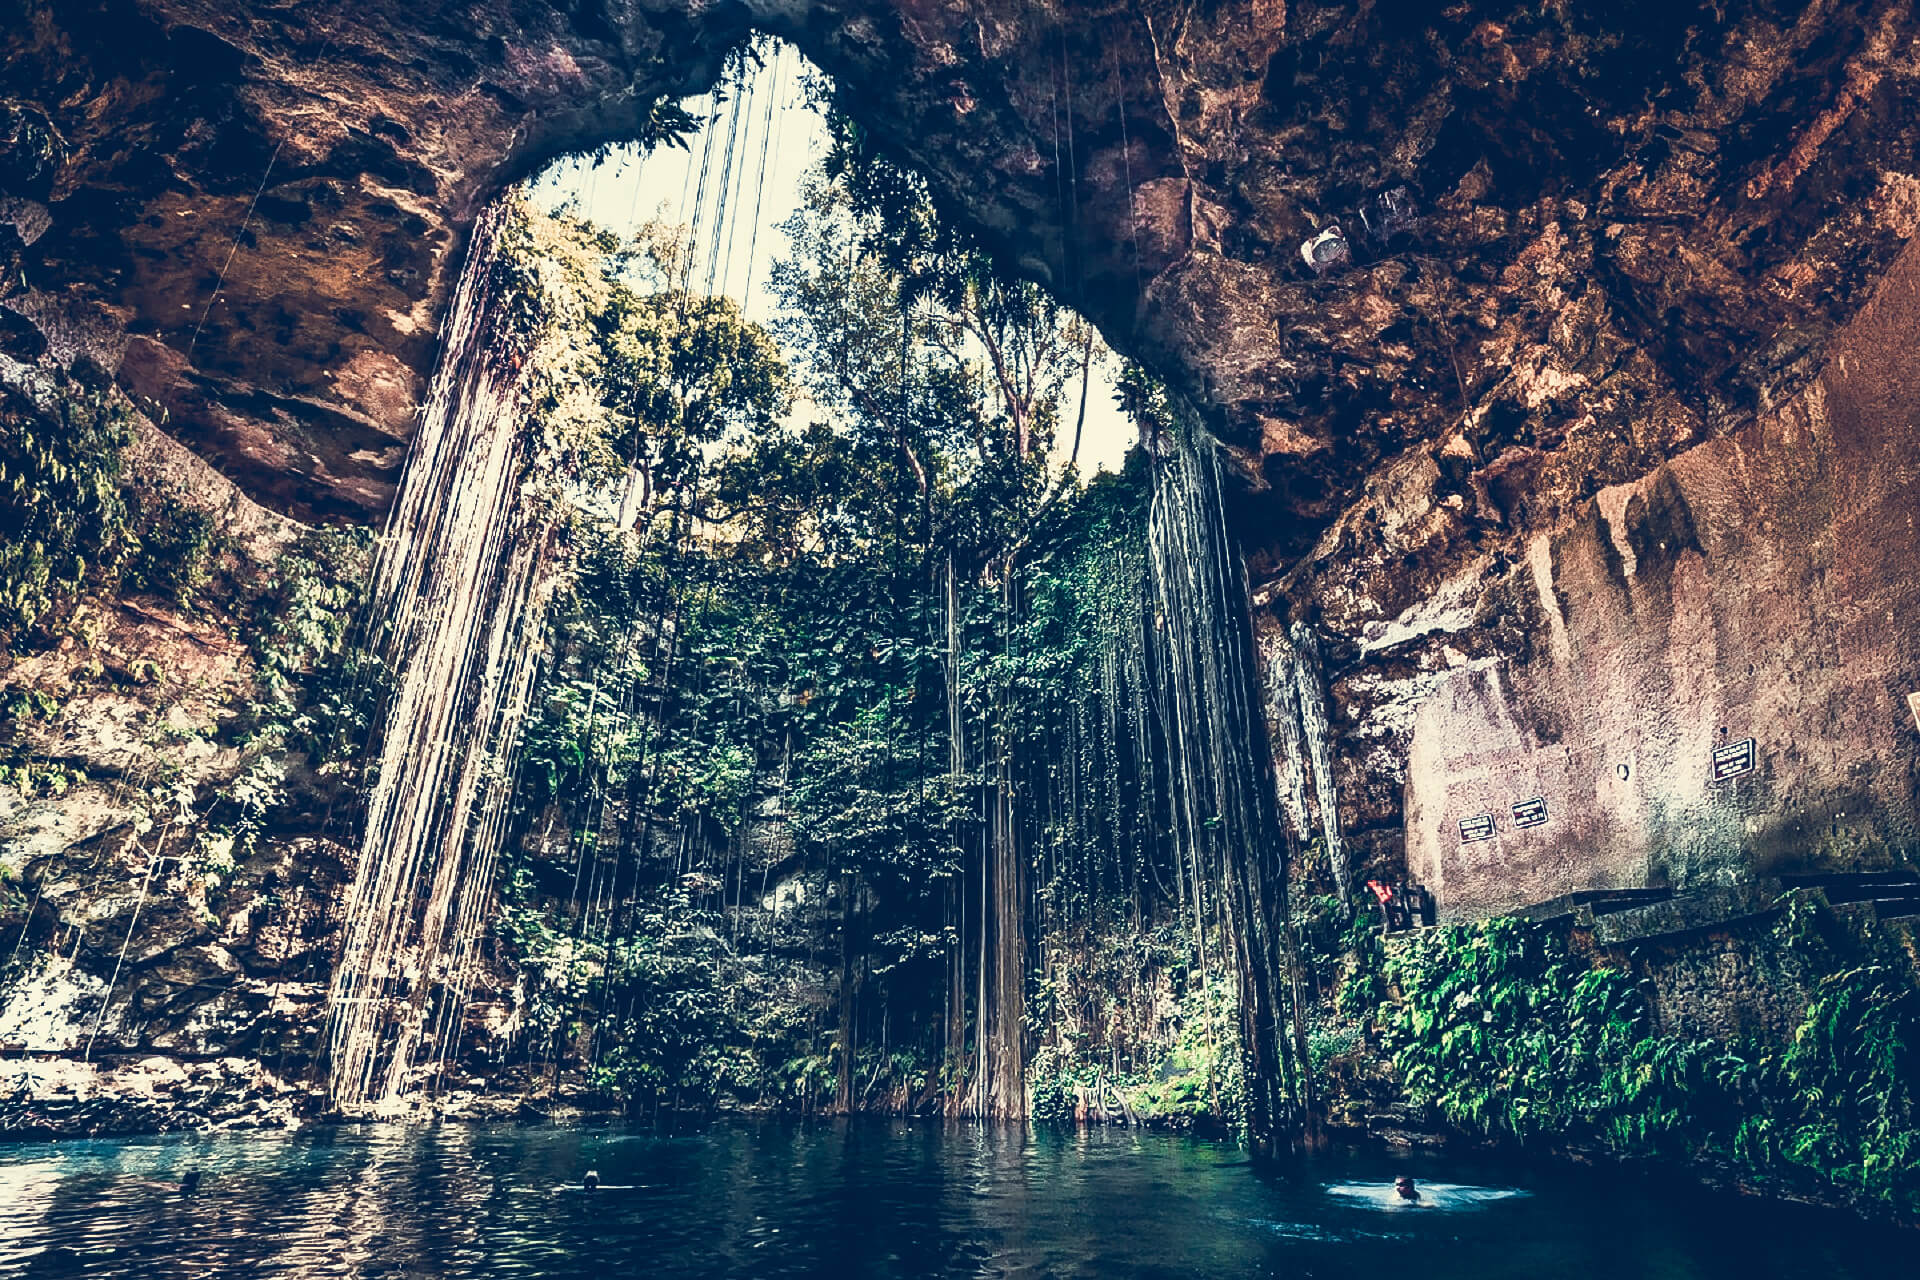 Caves in Mexico